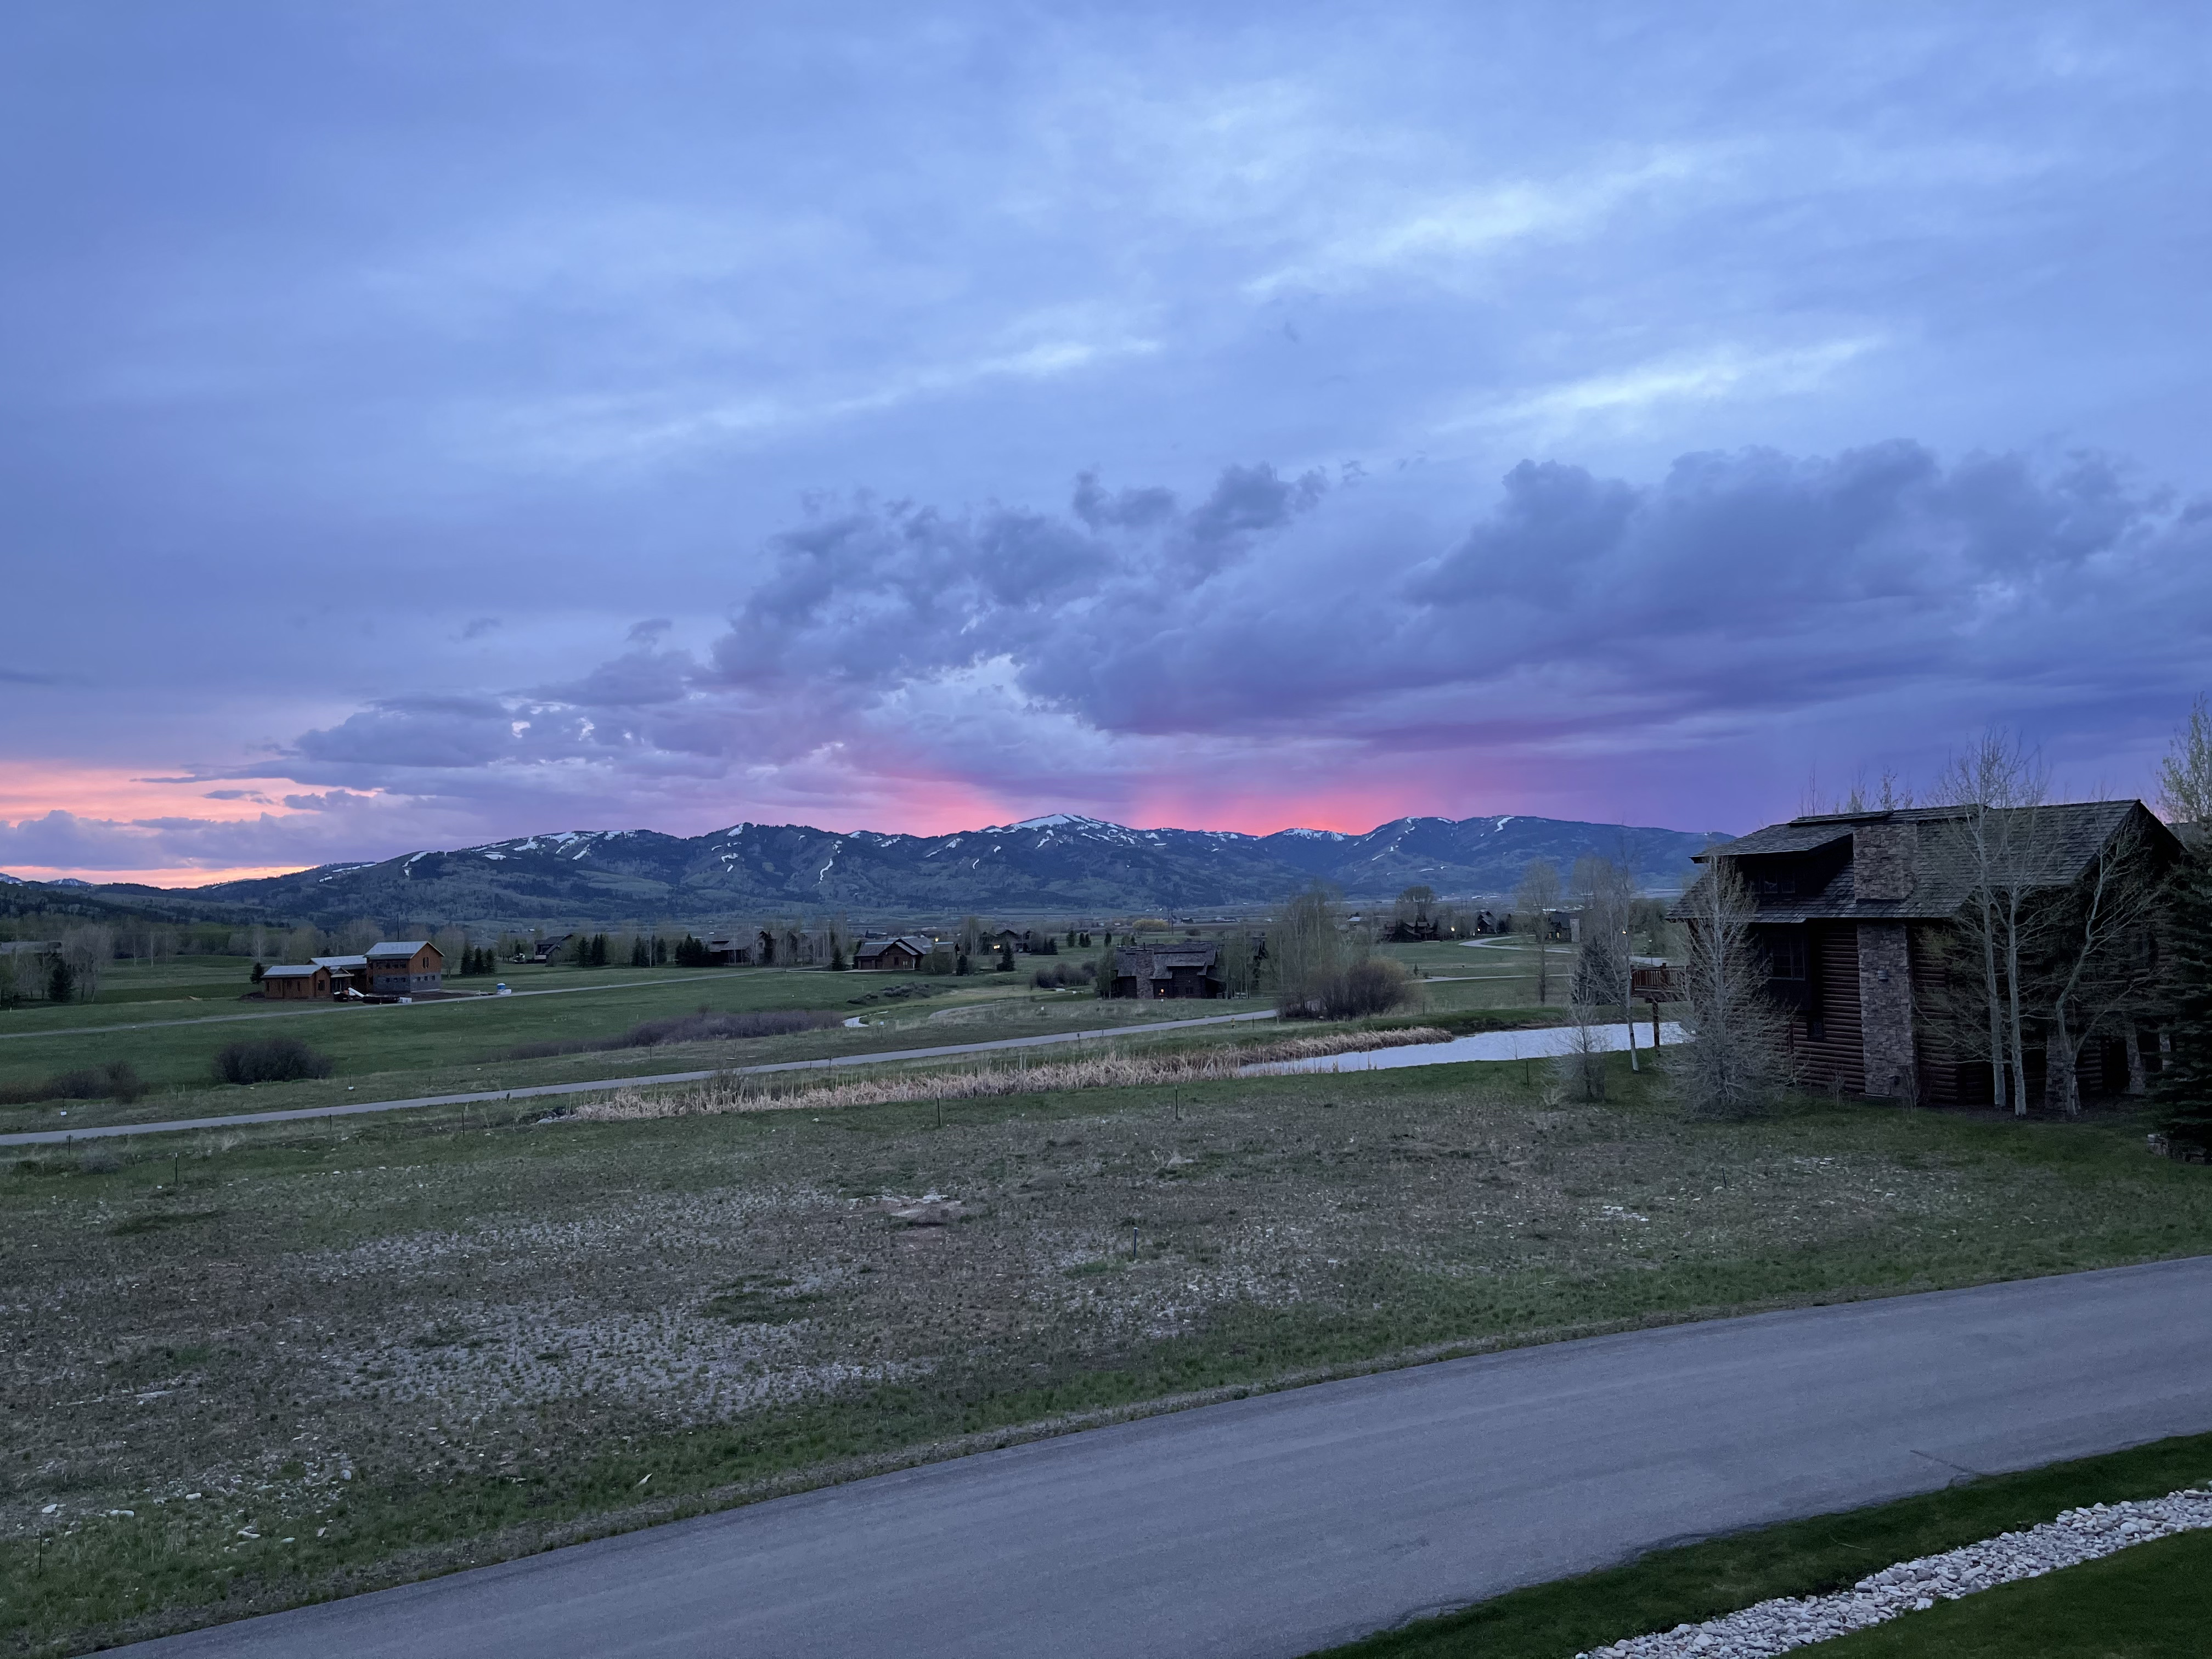 This photo was taken at sunset in Victor, Idaho.